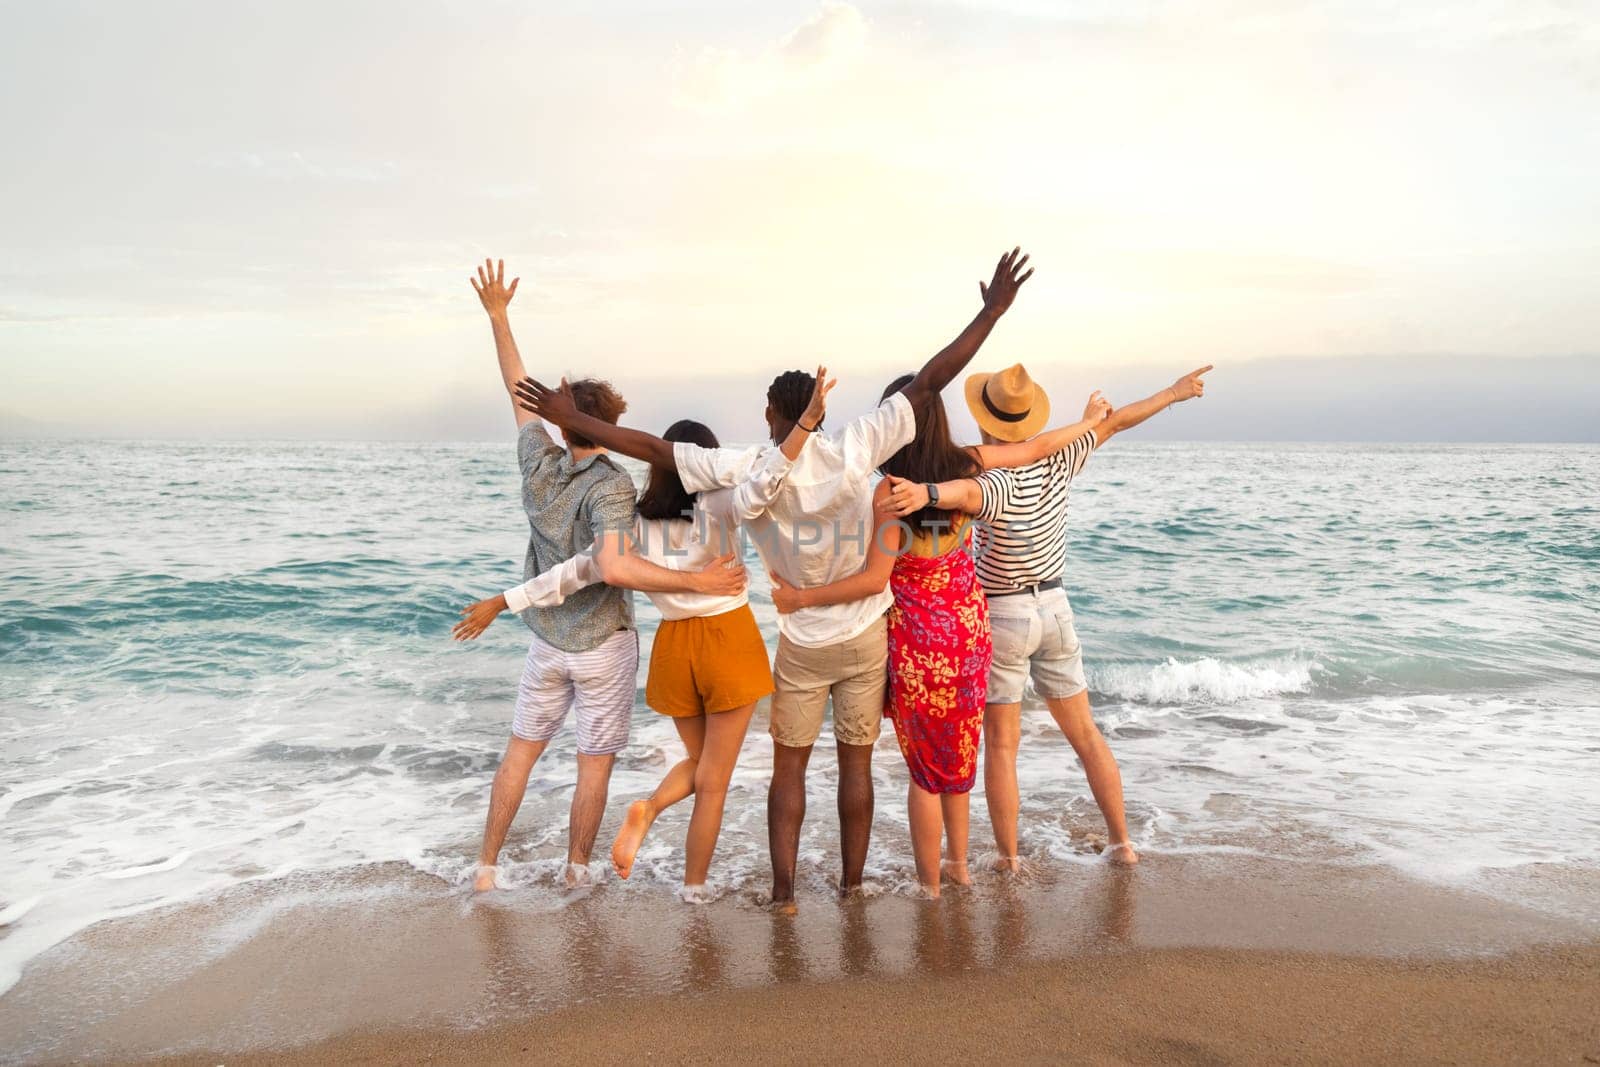 Rear view of multiracial friends embracing together looking at the ocean celebrating with arms up during vacation trip. Friendship concept.